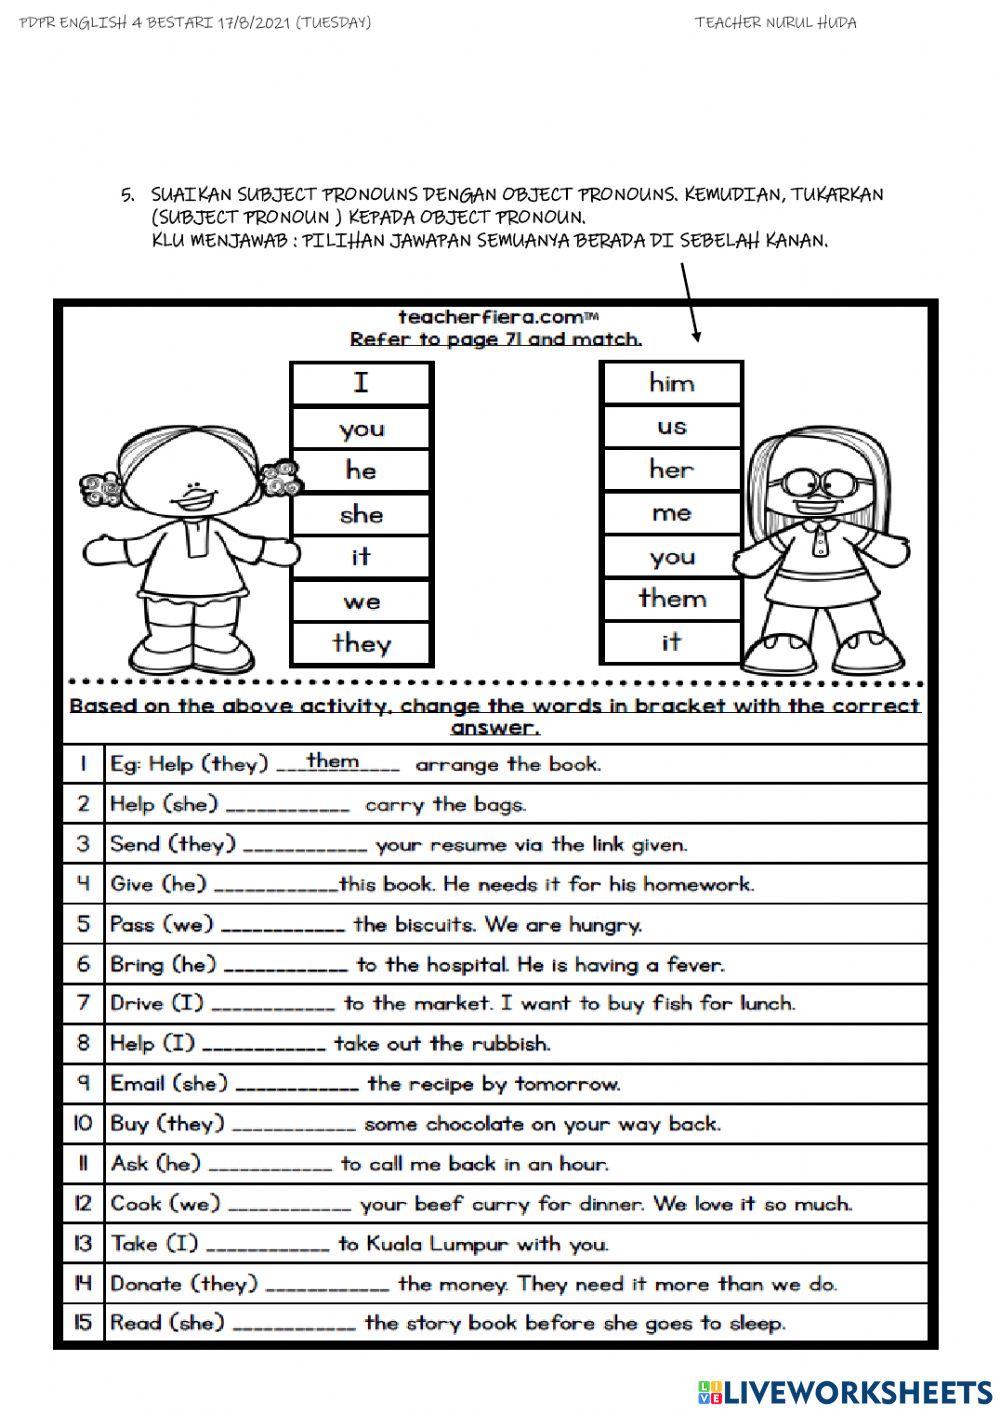 Module 7 Helping Out Object Pronouns page 71